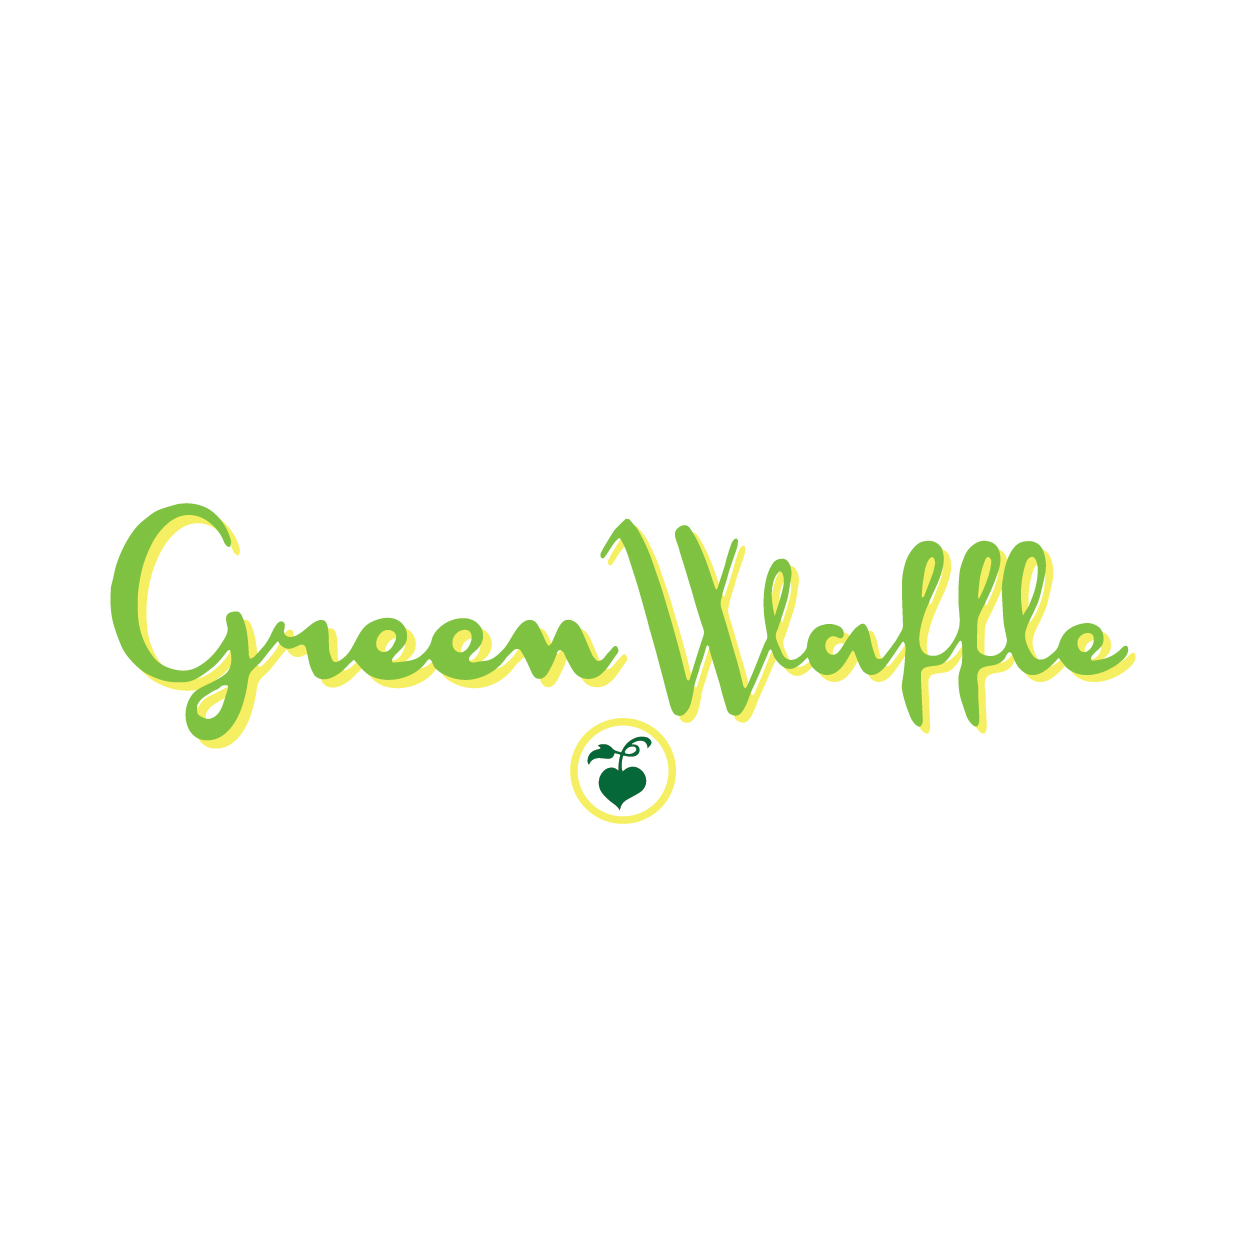 Green Waffle Diner